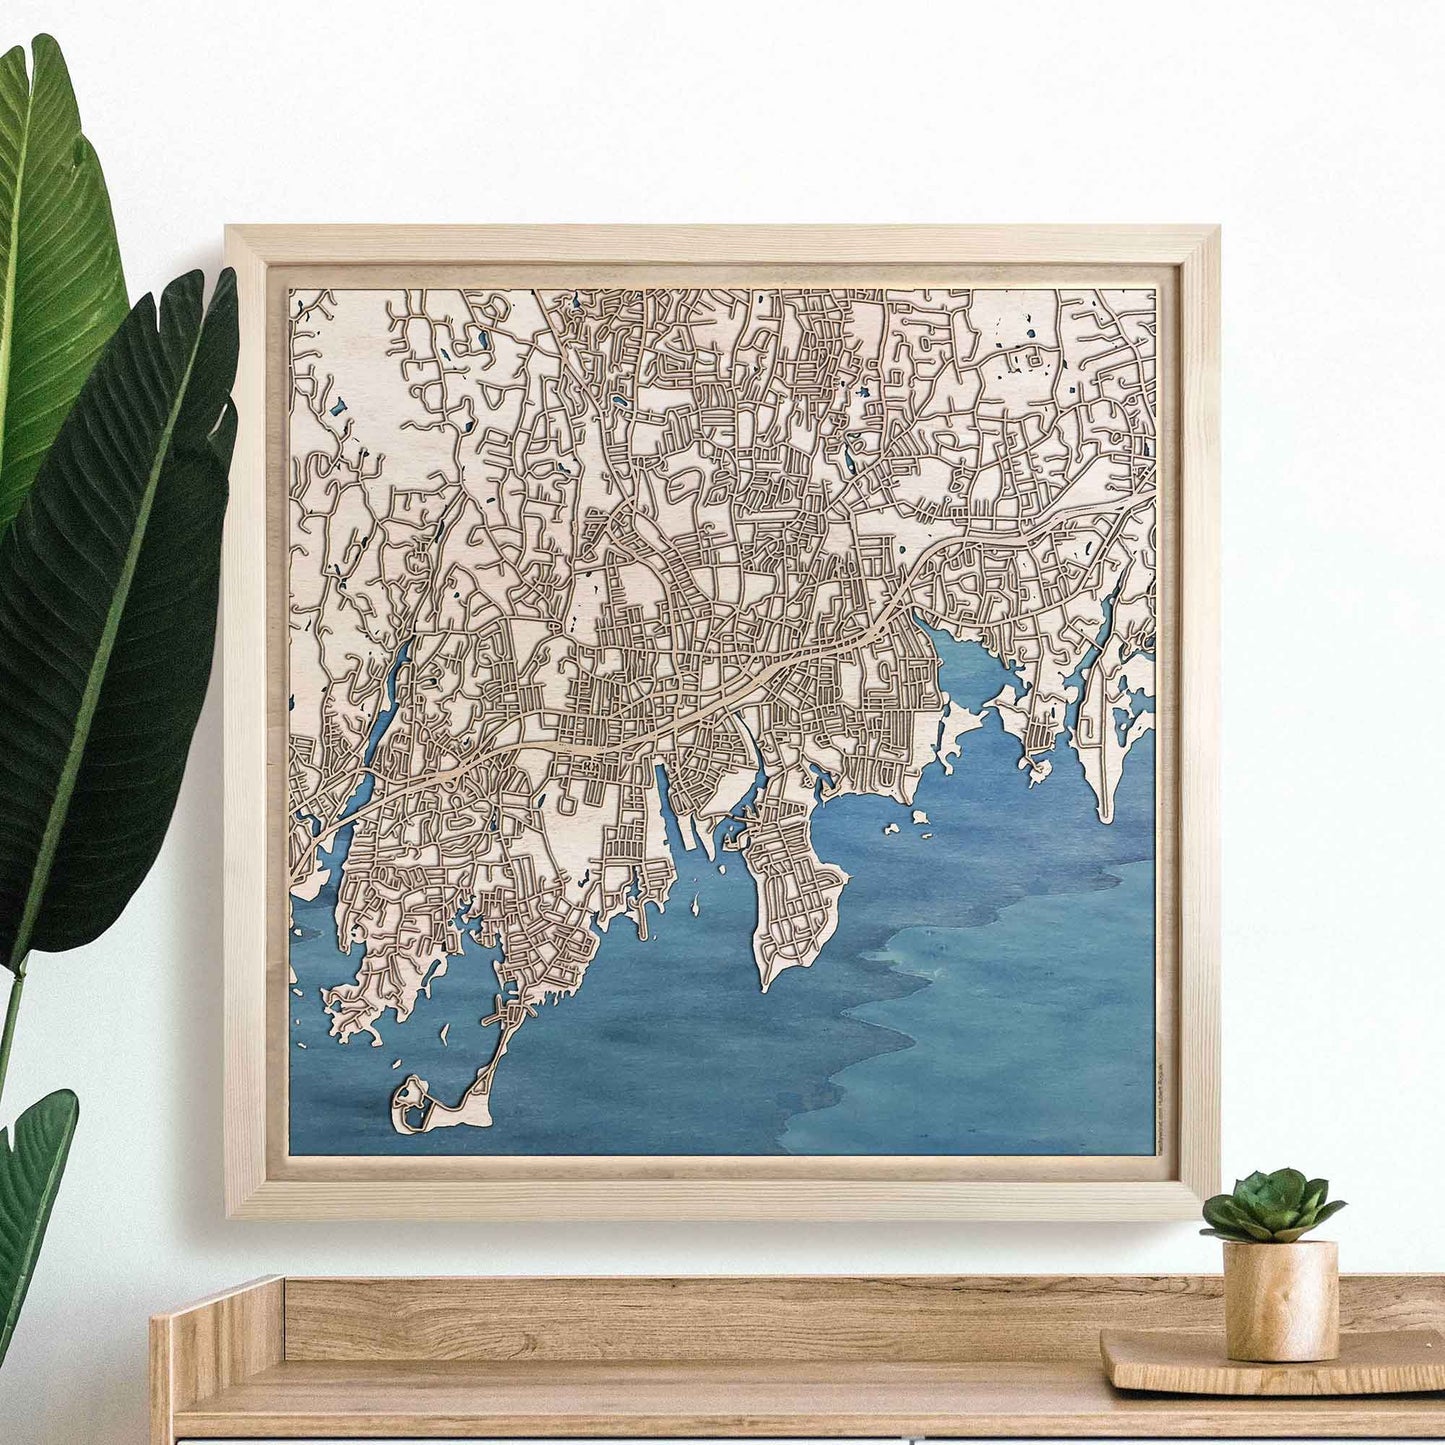 Stamford Wooden Map by CityWood - Custom Wood Map Art - Unique Laser Cut Engraved - Anniversary Gift